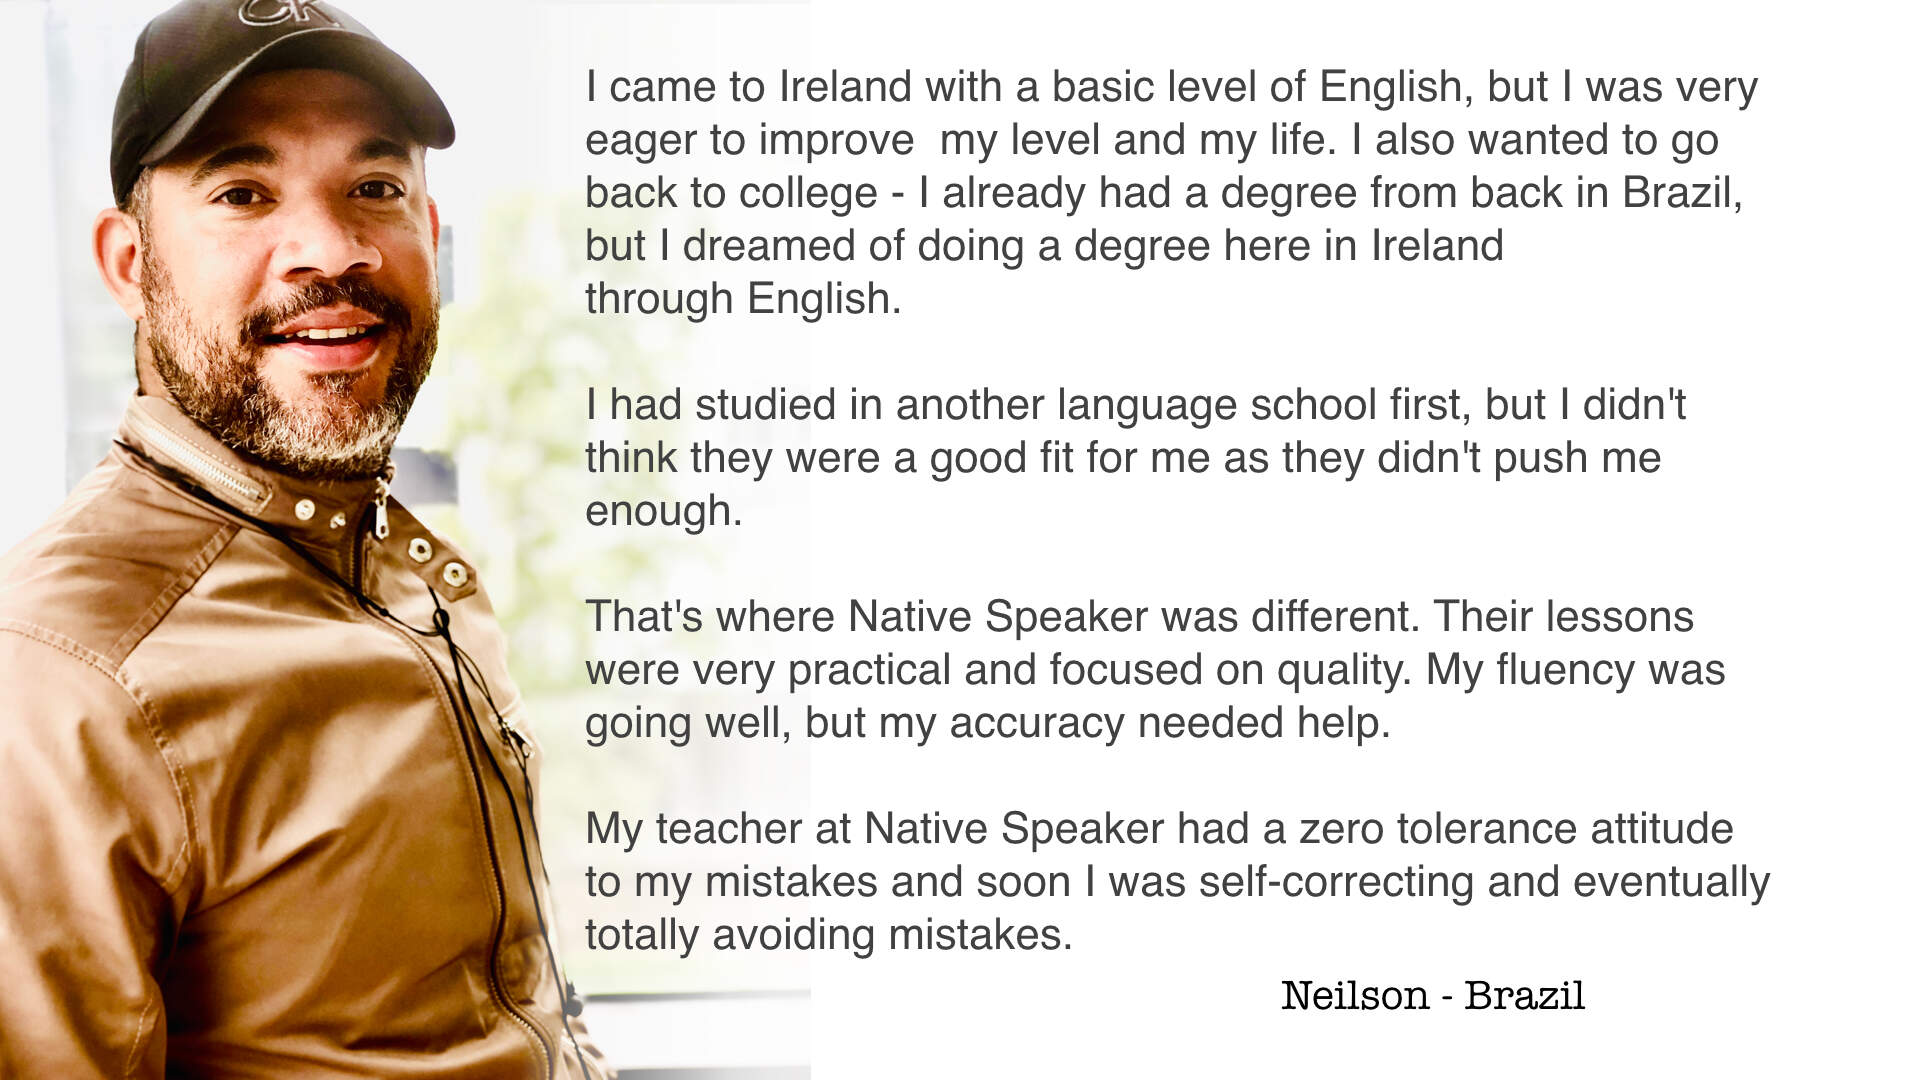 I came to Ireland with a basic level of English, but I was very eager to improve  my level and my life. I also wanted to go back to college - I already had a degree from back in Brazil, but I dreamed of doing a degree here in Ireland through English.  I had studied in another language school first, but I didn't think they were a good fit for me as they didn't push me enough.  That's where Native Speaker was different. Their lessons were very practical and focused on quality. My fluency was going well, but my accuracy needed help.  My teacher at Native Speaker had a zero tolerance attitude to my mistakes and soon I was self-correcting and eventually totally avoiding mistakes.